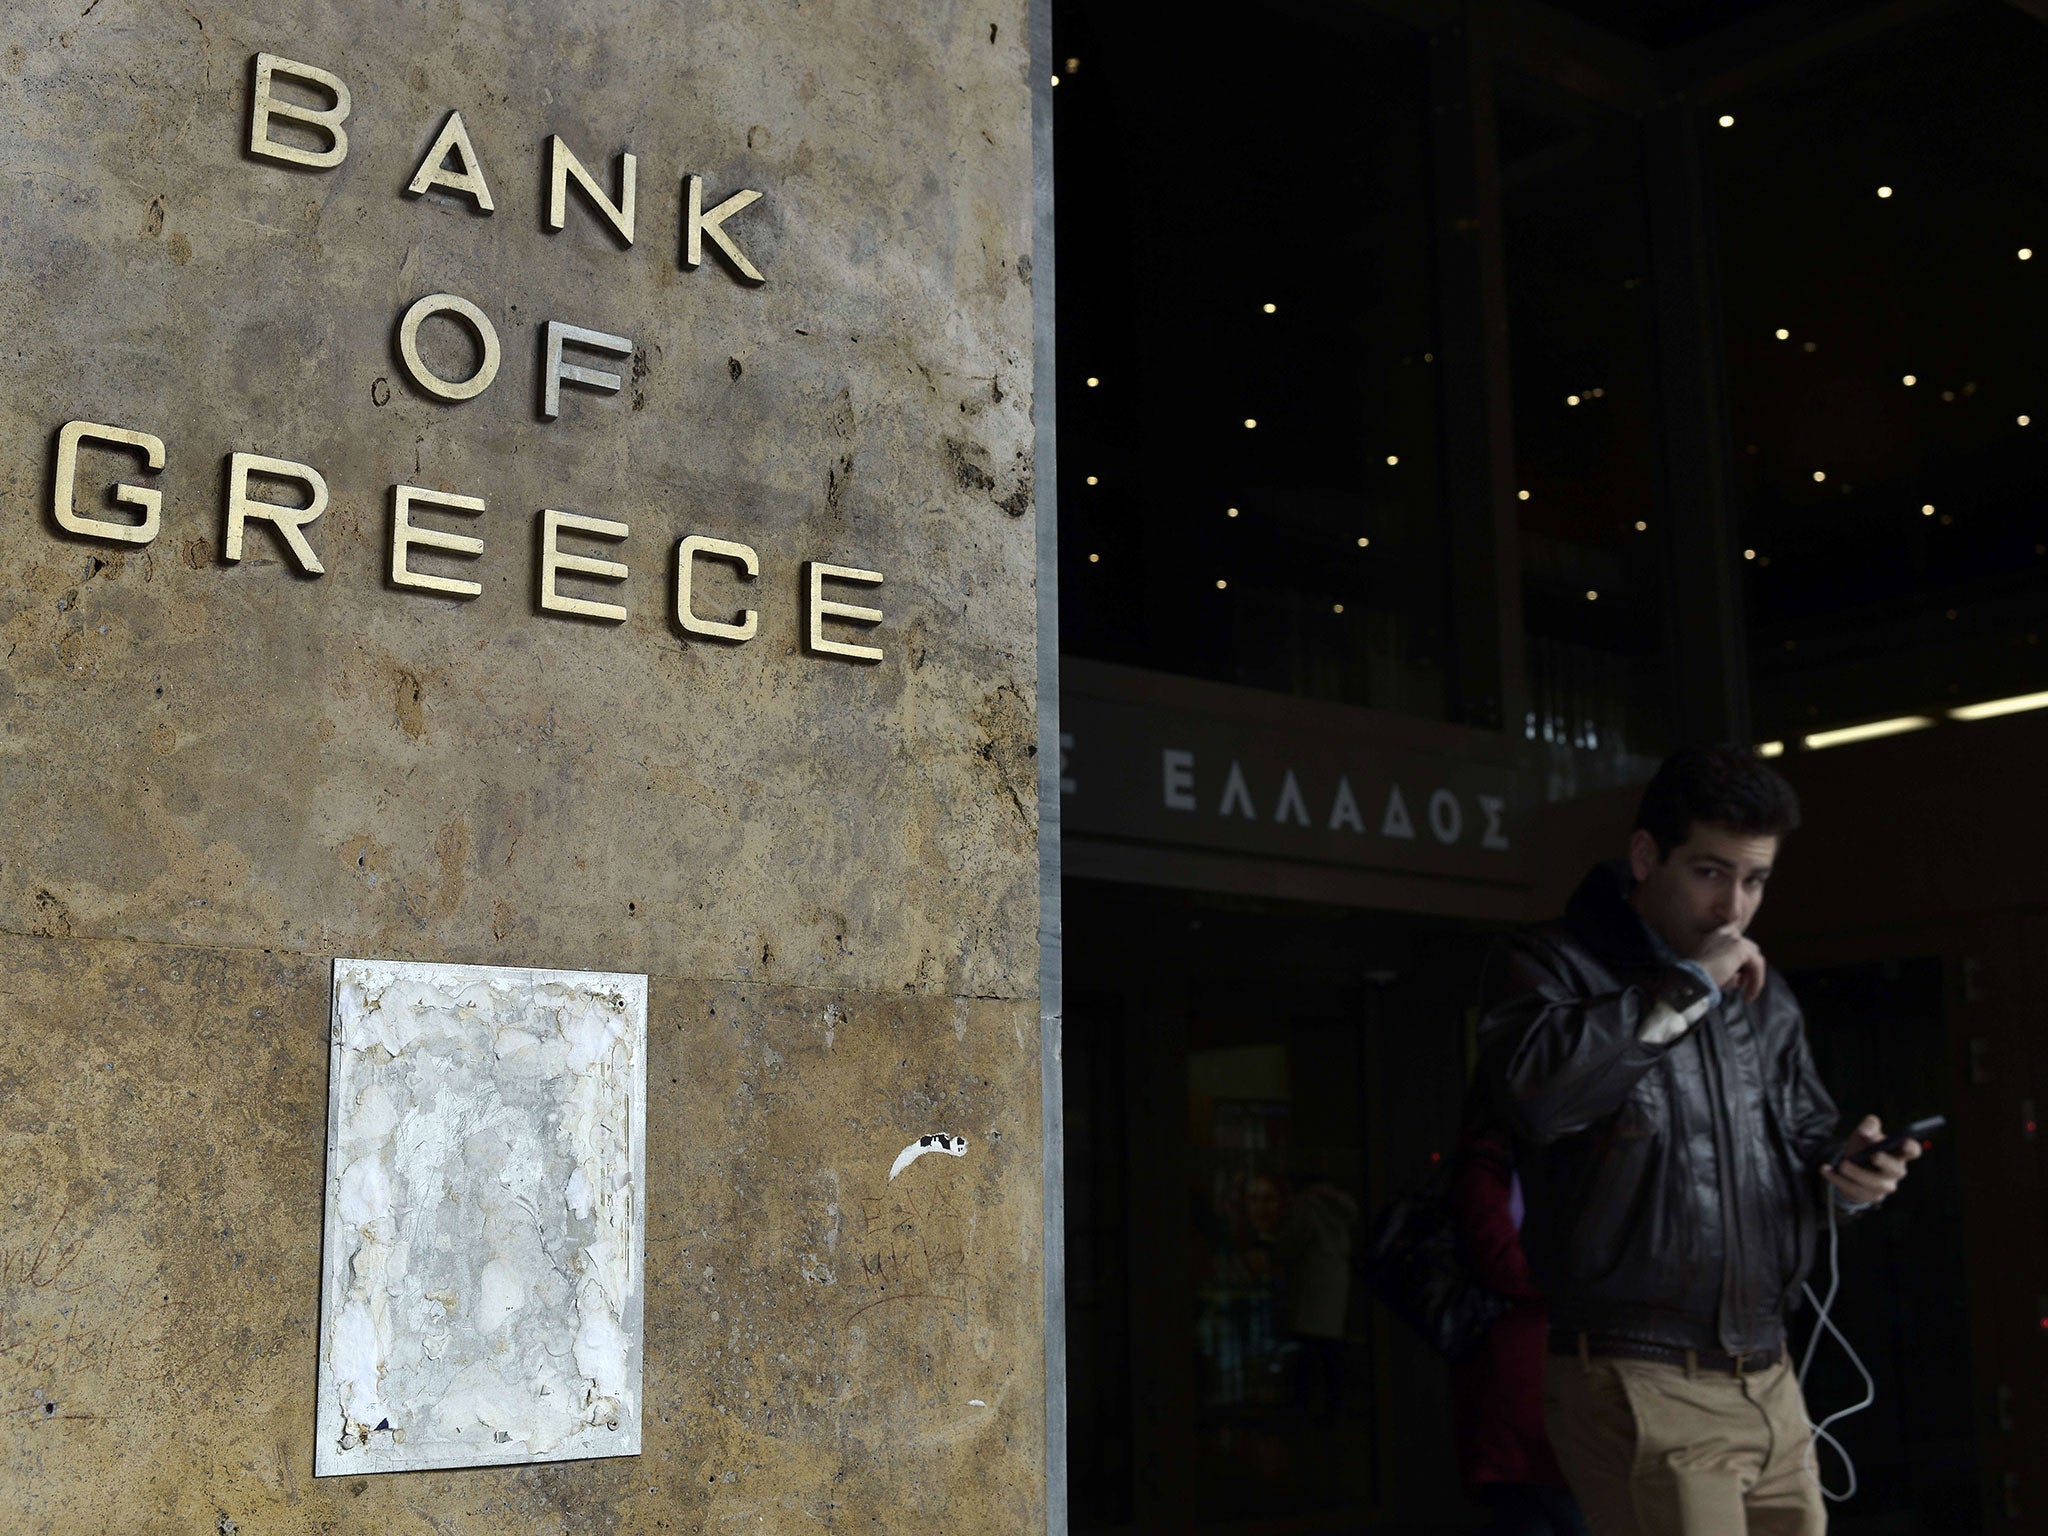 Greek bank account holders pulled an estimated €4.2 billion from their bank accounts last week after talks between the Greek government and its European lenders turned acrimonious